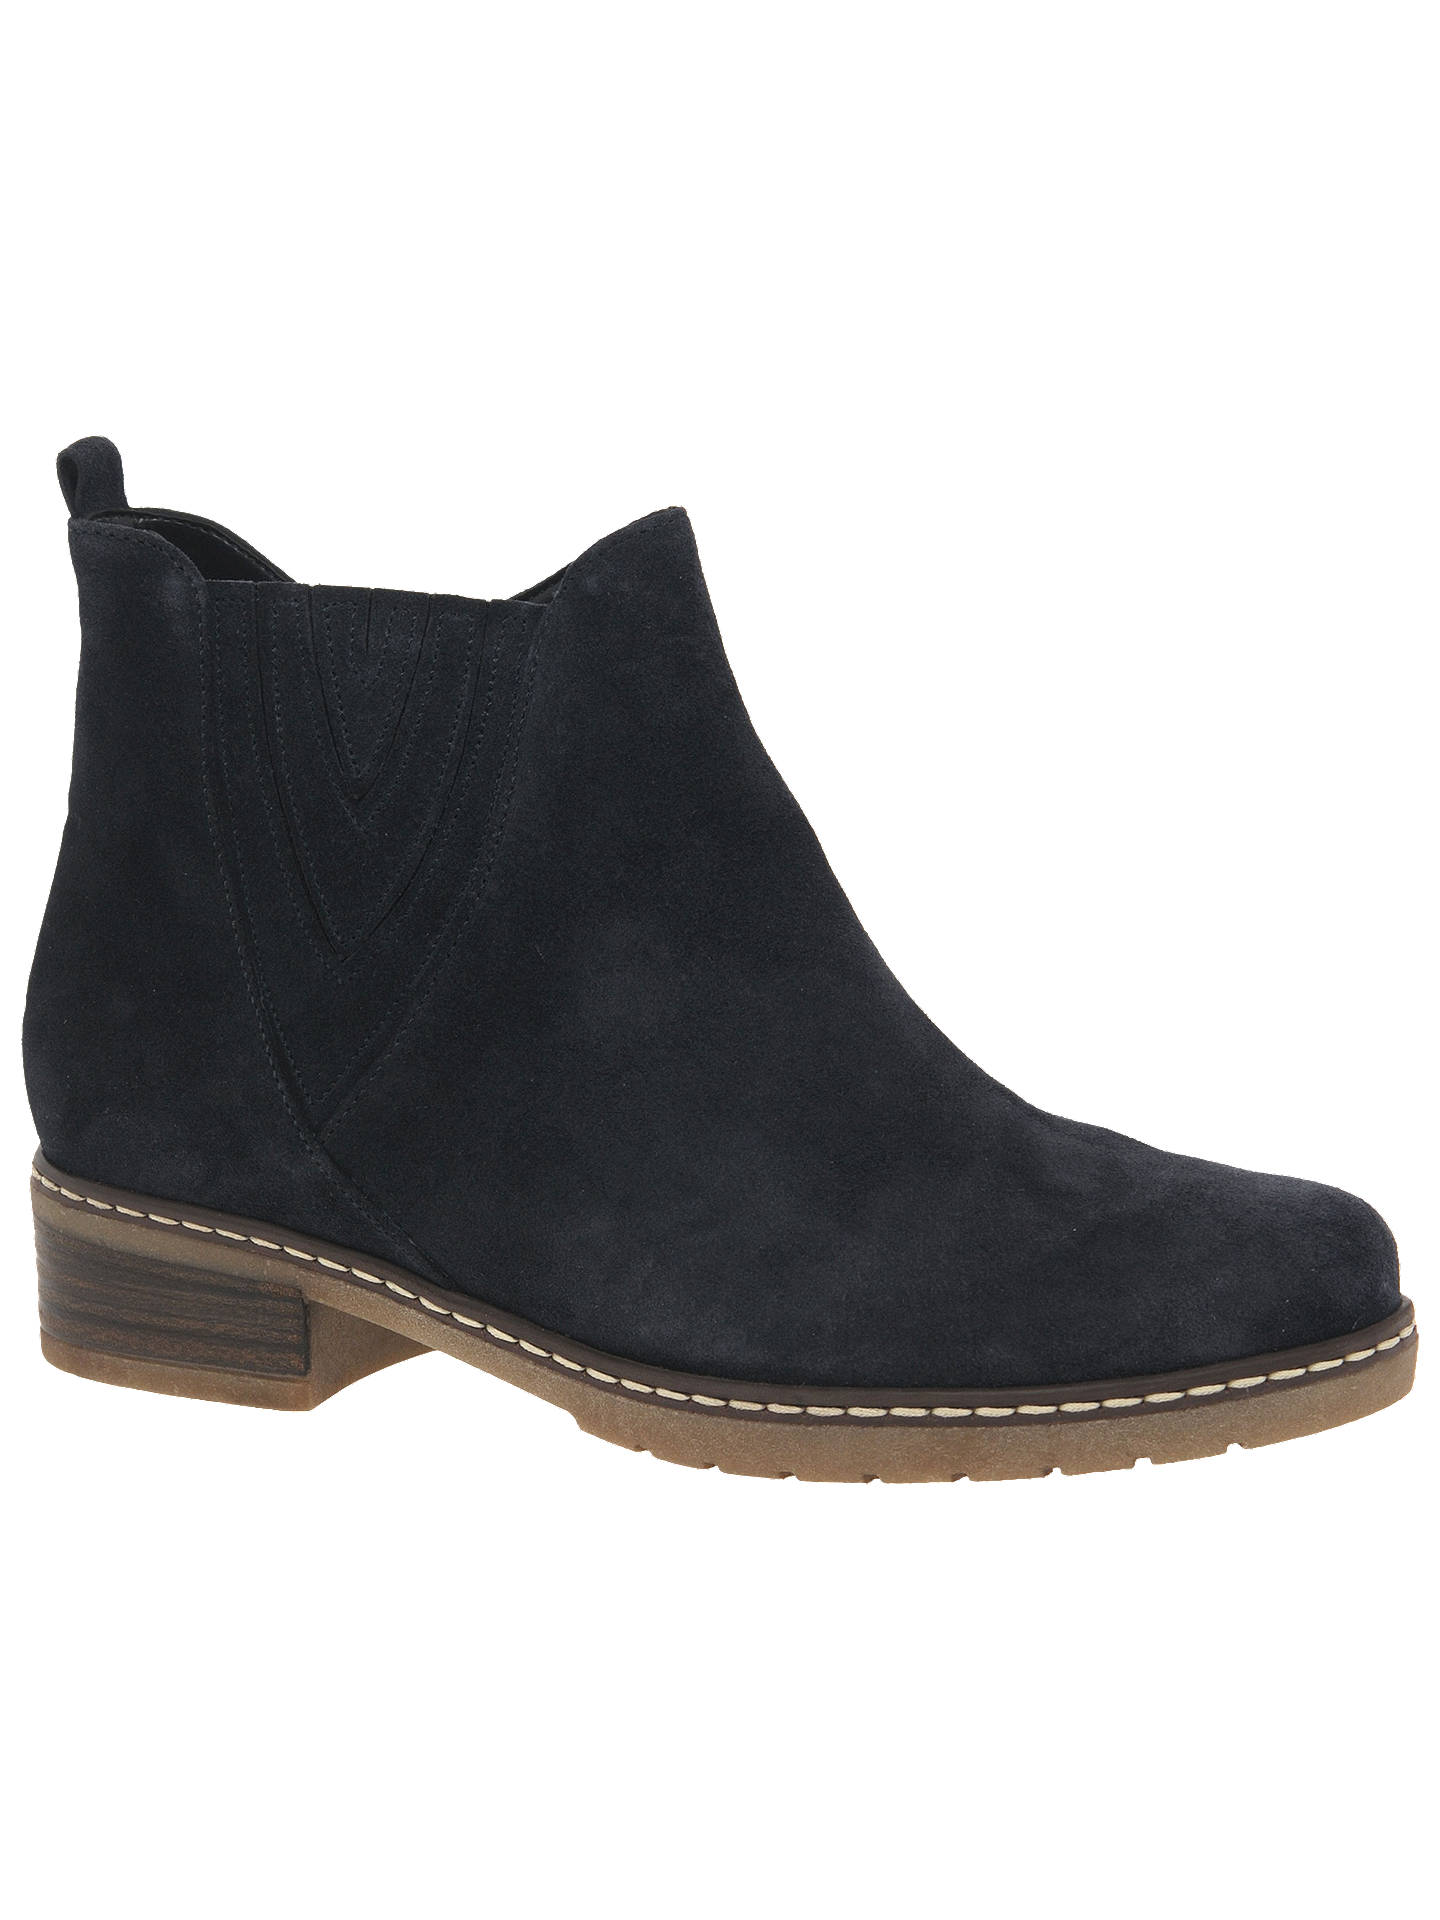 Gabor Dorothy Extra Wide Fit Ankle Boots at John Lewis & Partners